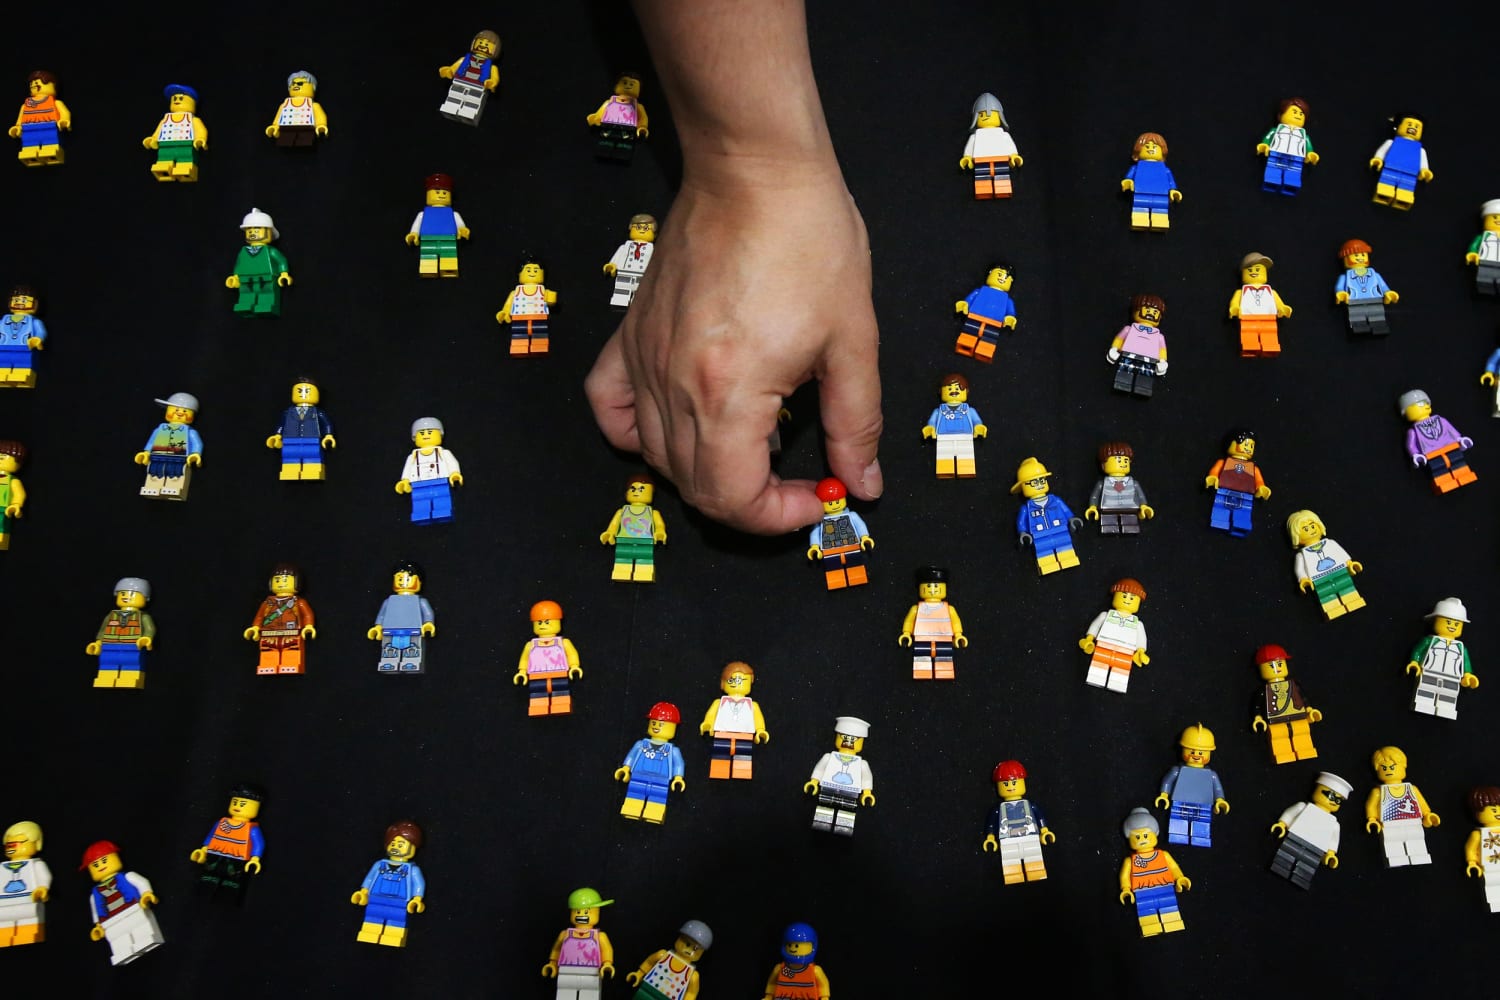 LEGOs for girls has feminist group in a twist